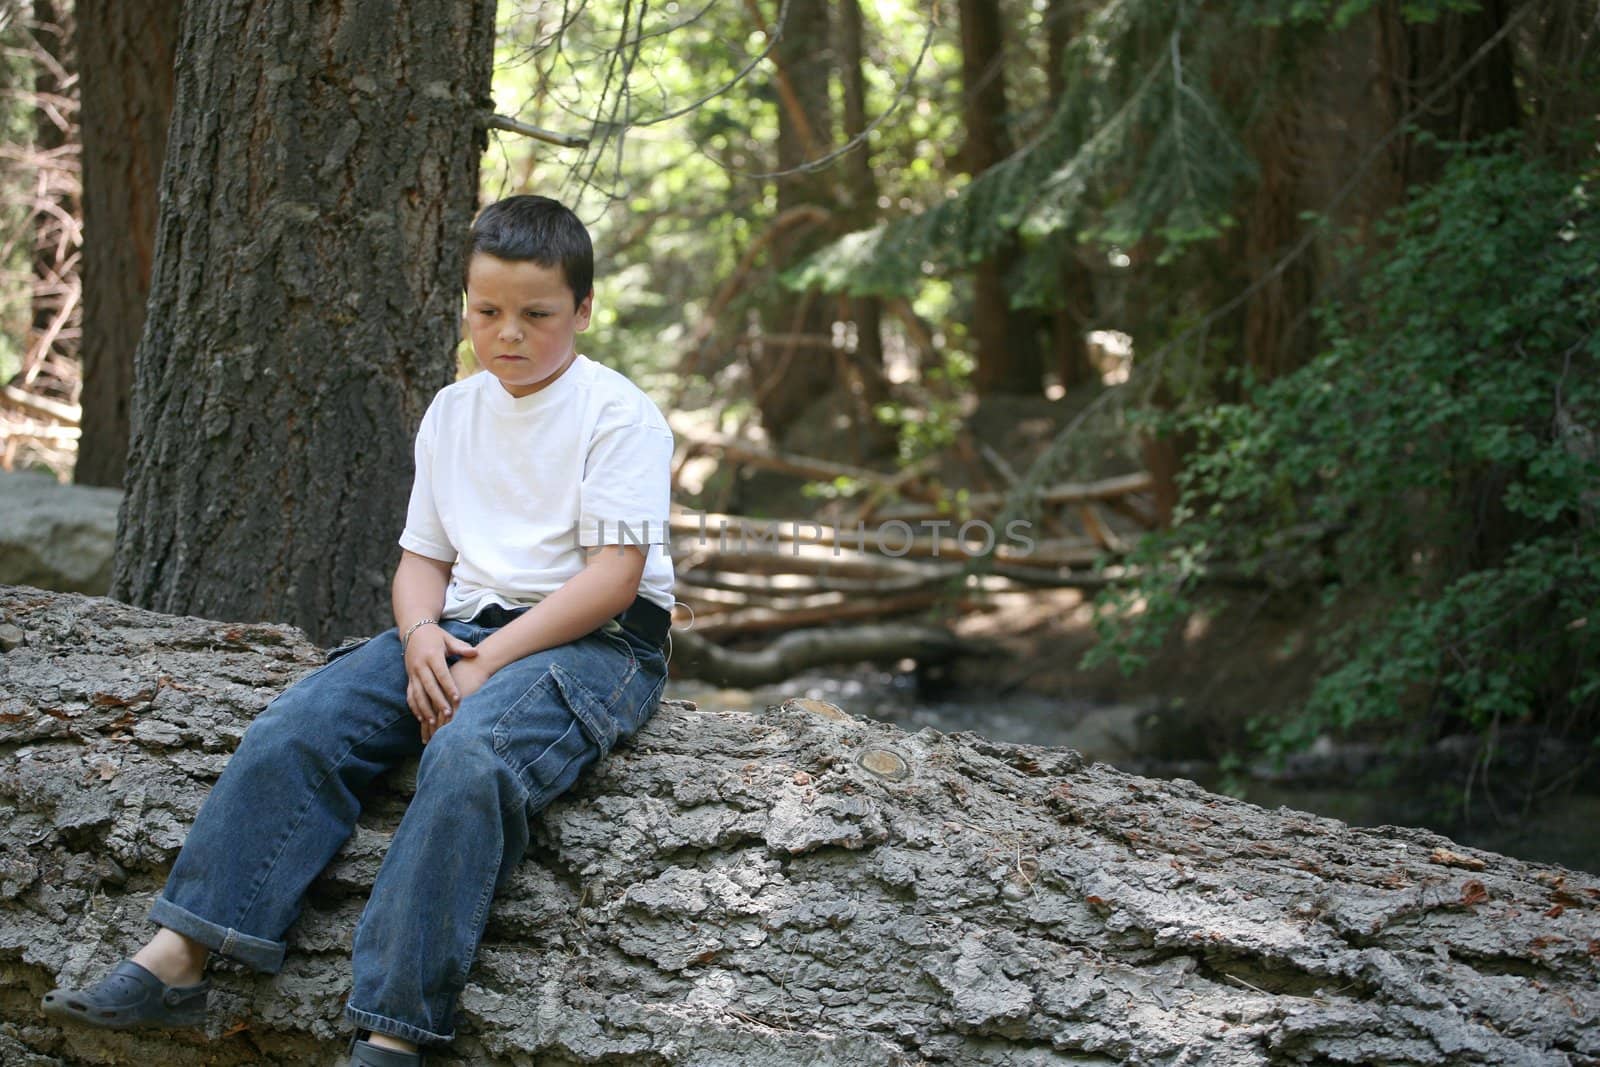 Young boy that appears sad to be sitting on this log in the forest